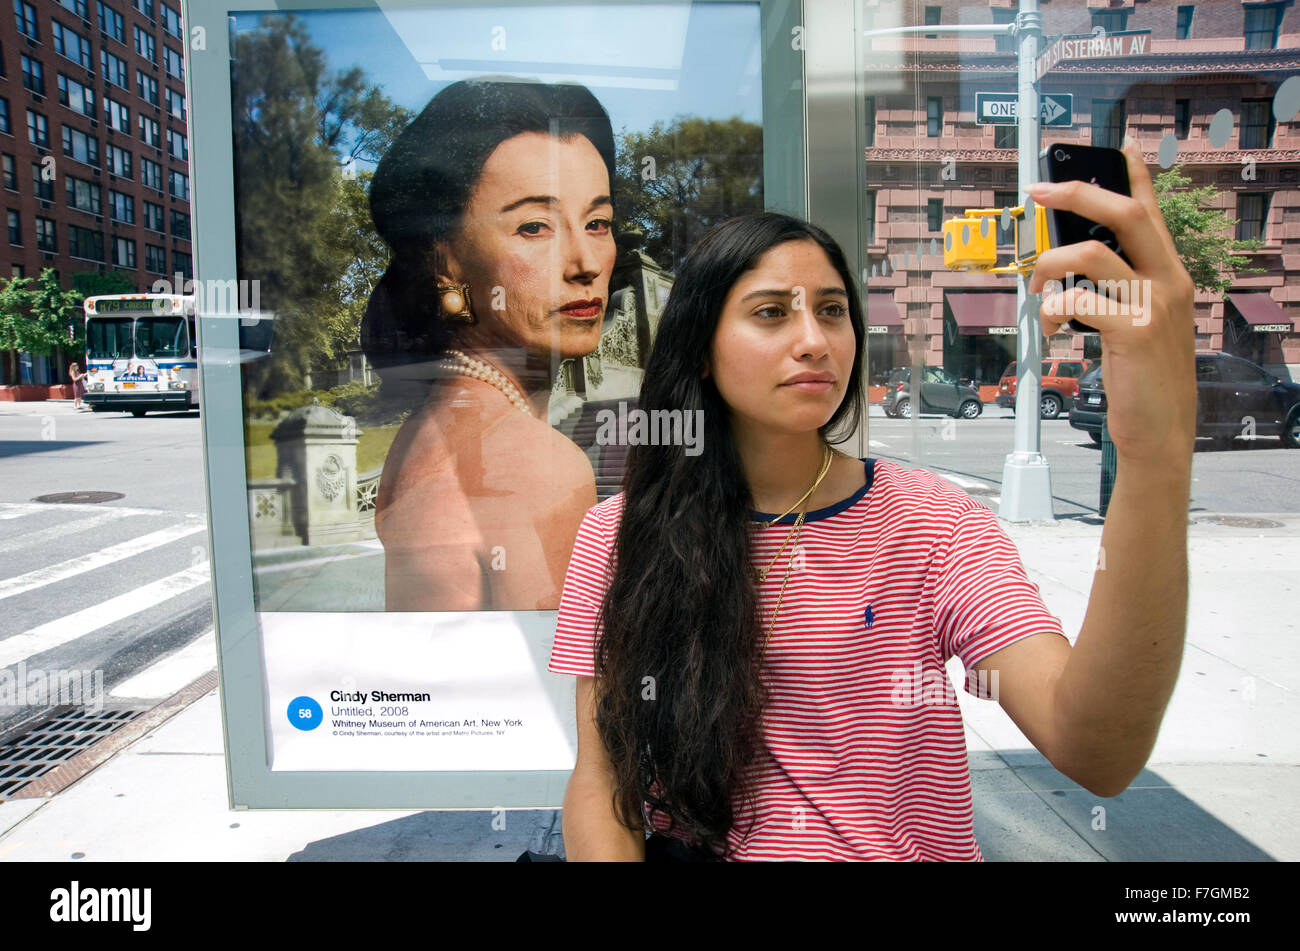 Young woman taking a selfie in front of a Cindy Sherman photograph reproduced on an outdoor advertising panel at a bus shelter in Manhattan for the Art Everywhere project. Stock Photo